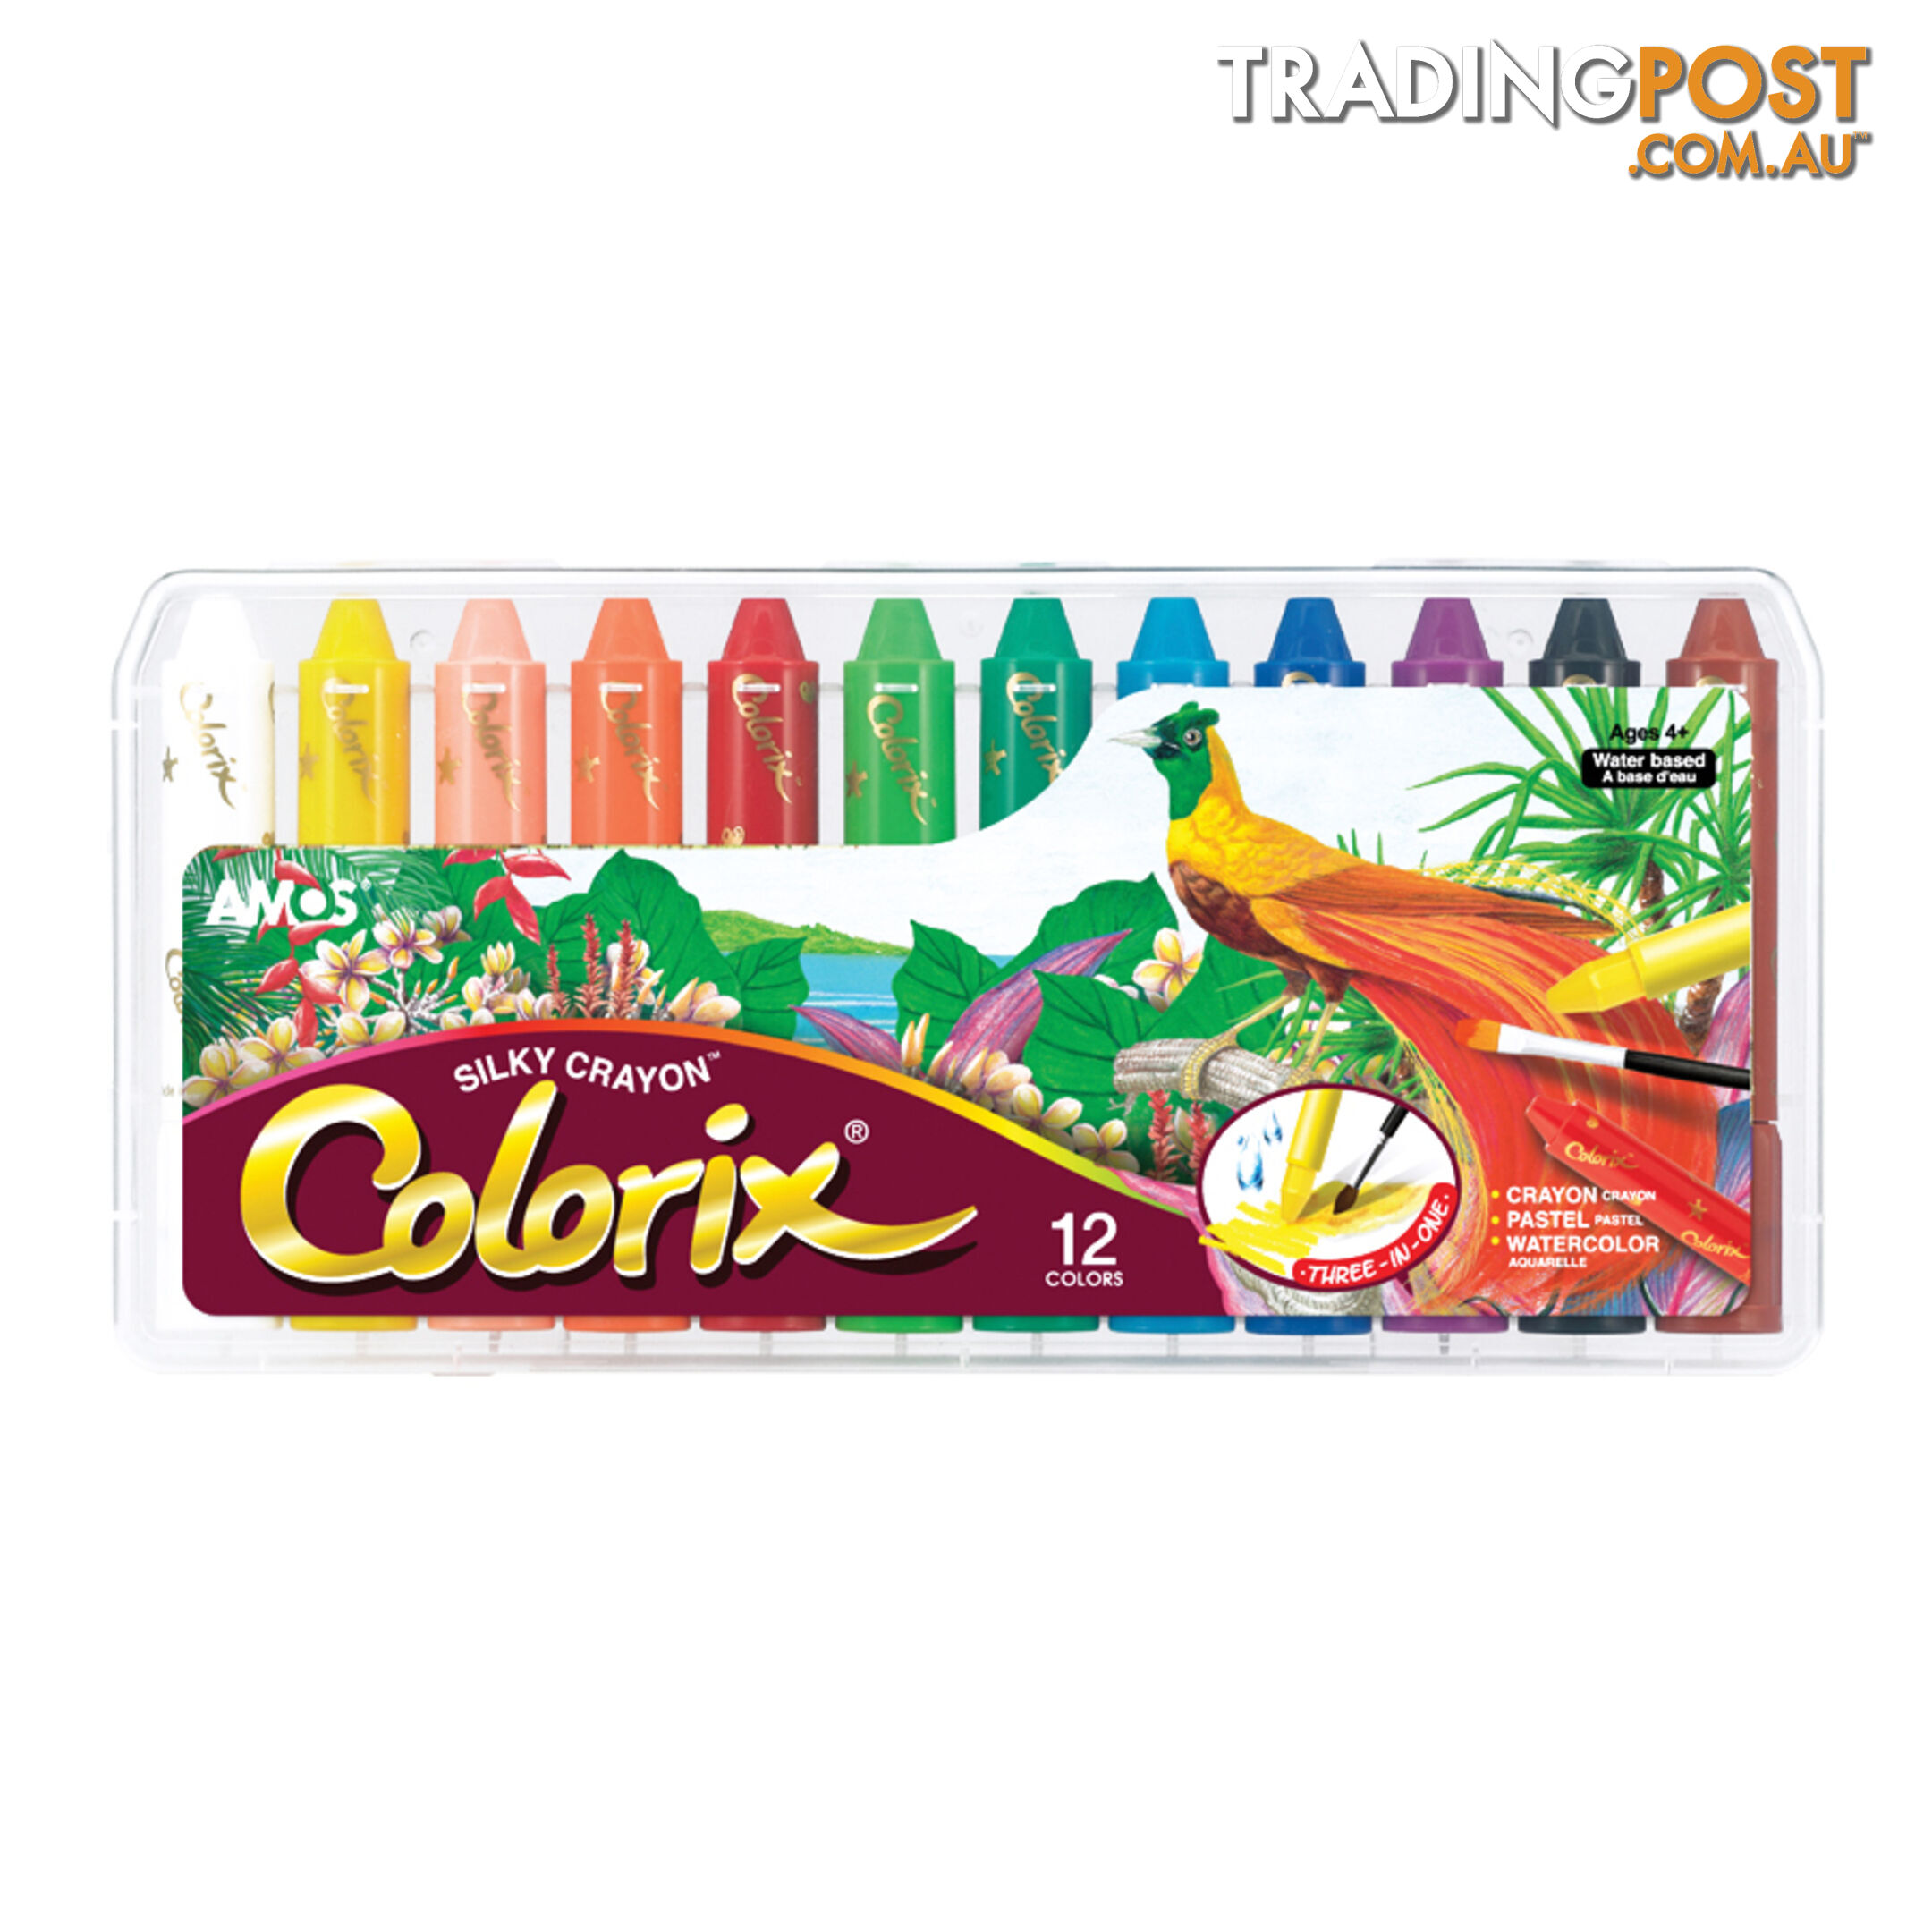 Colorix Crayons 12 pack Gift Case - Amos - 8802946502127